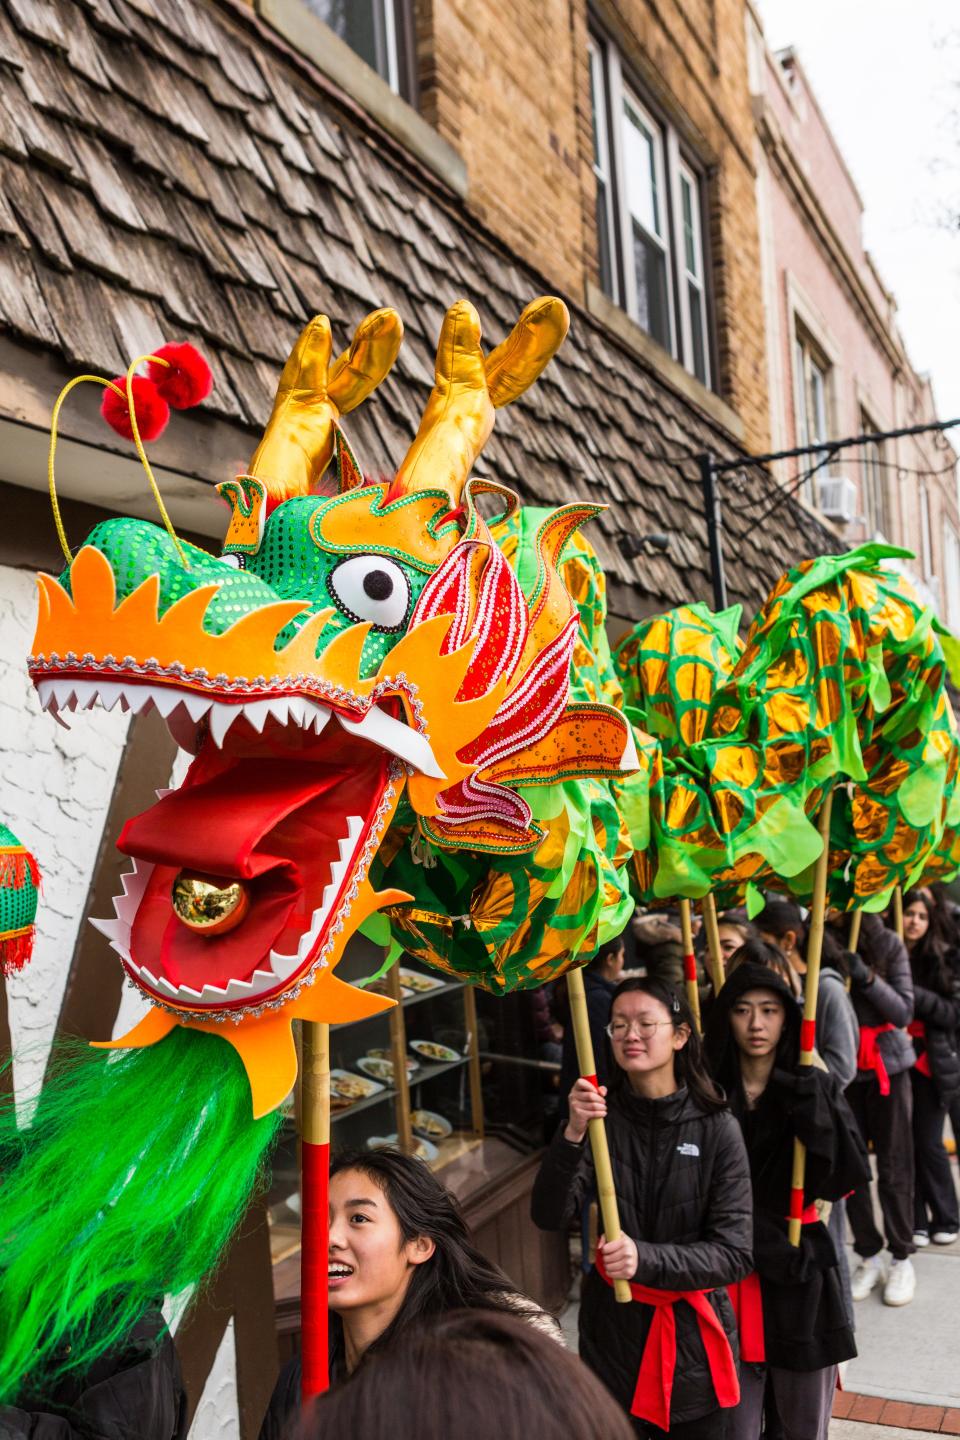 The Lunar New Year was celebrated with a dragon along Main Street.